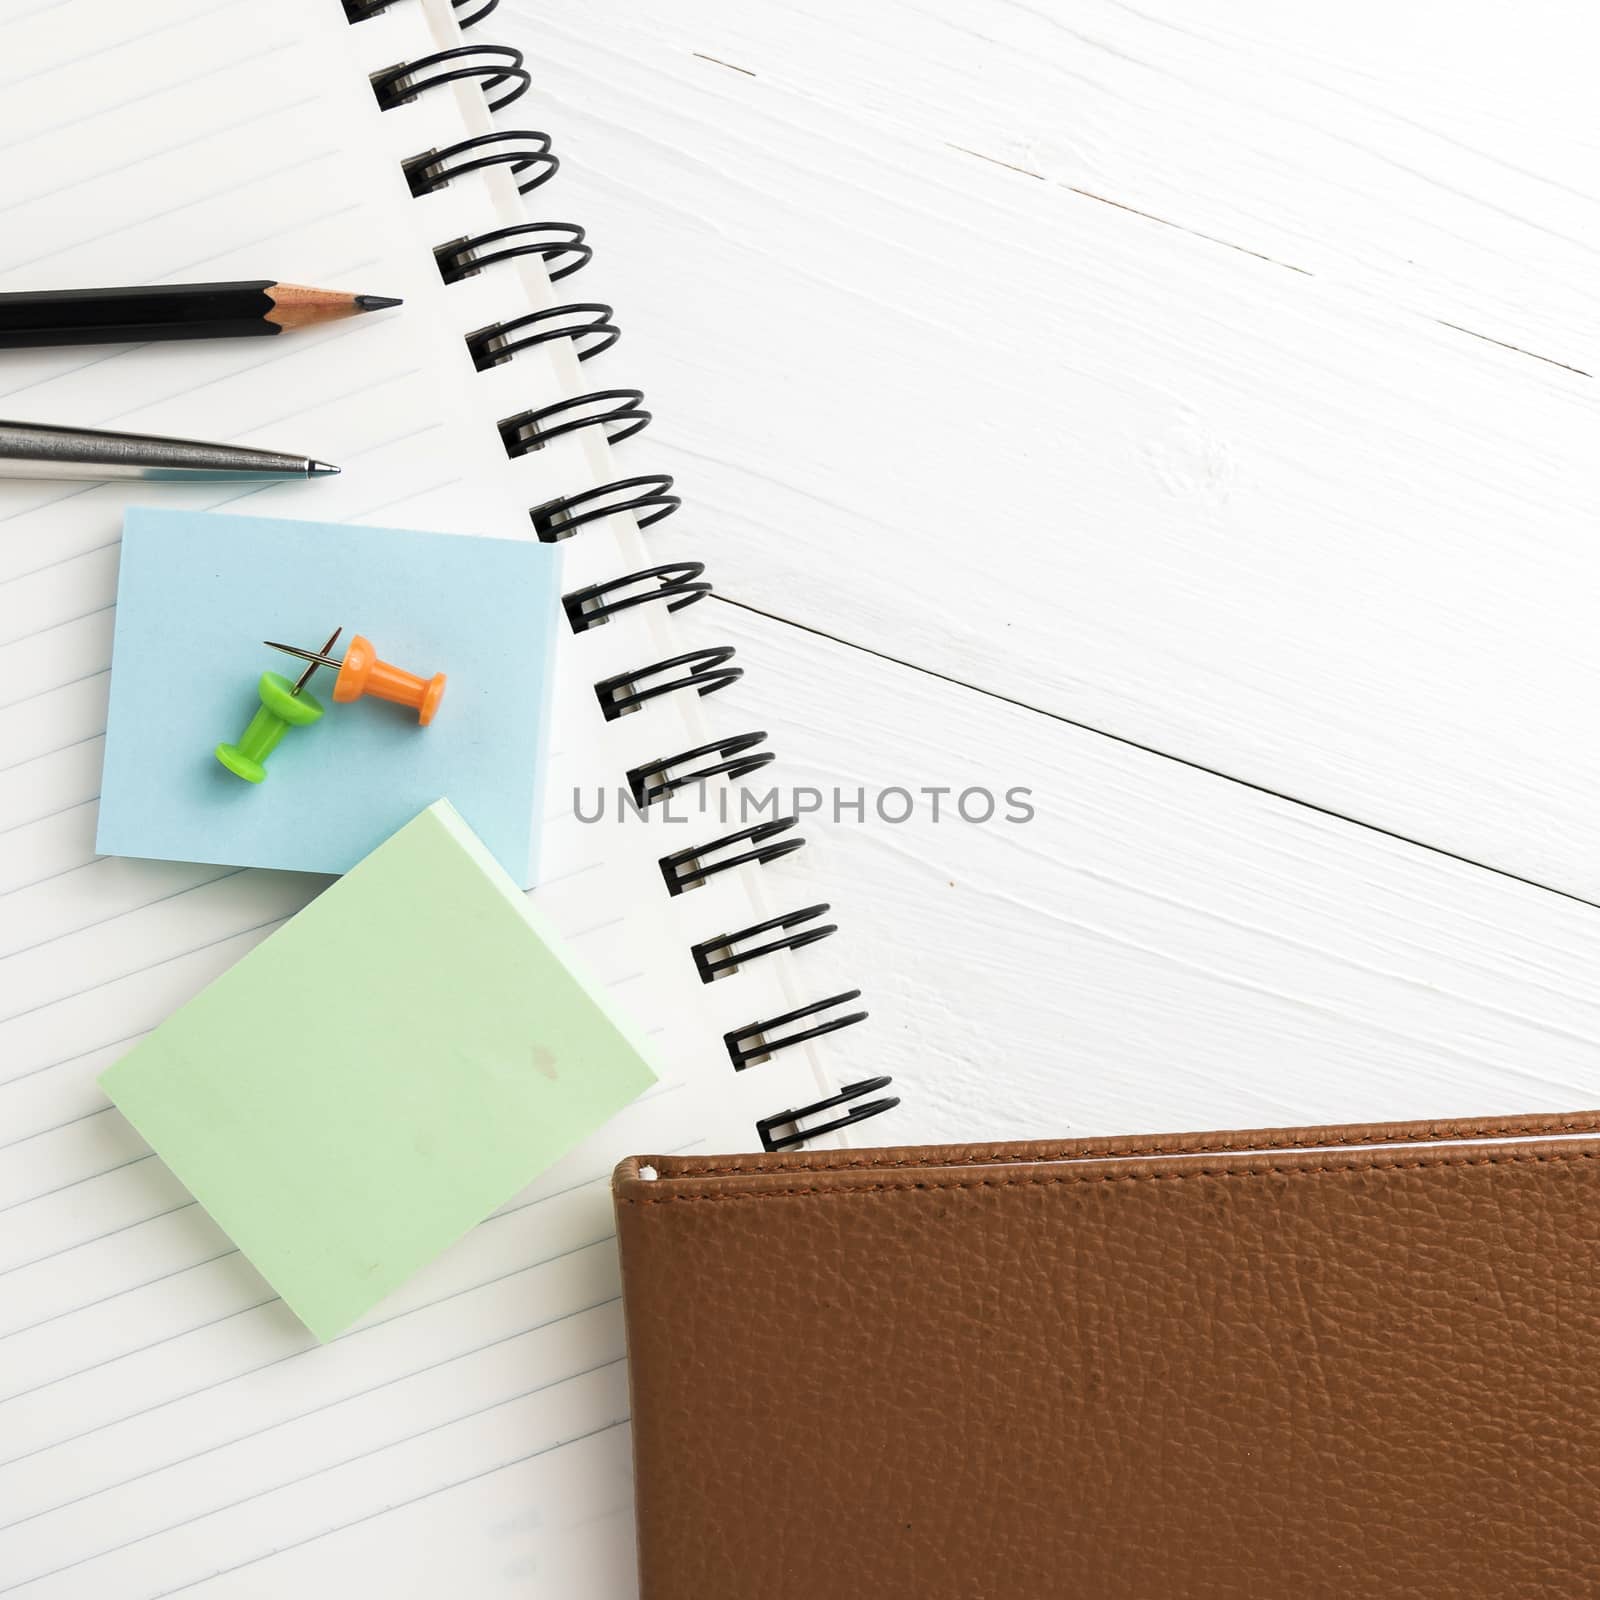 brown notebook with office supplies by ammza12